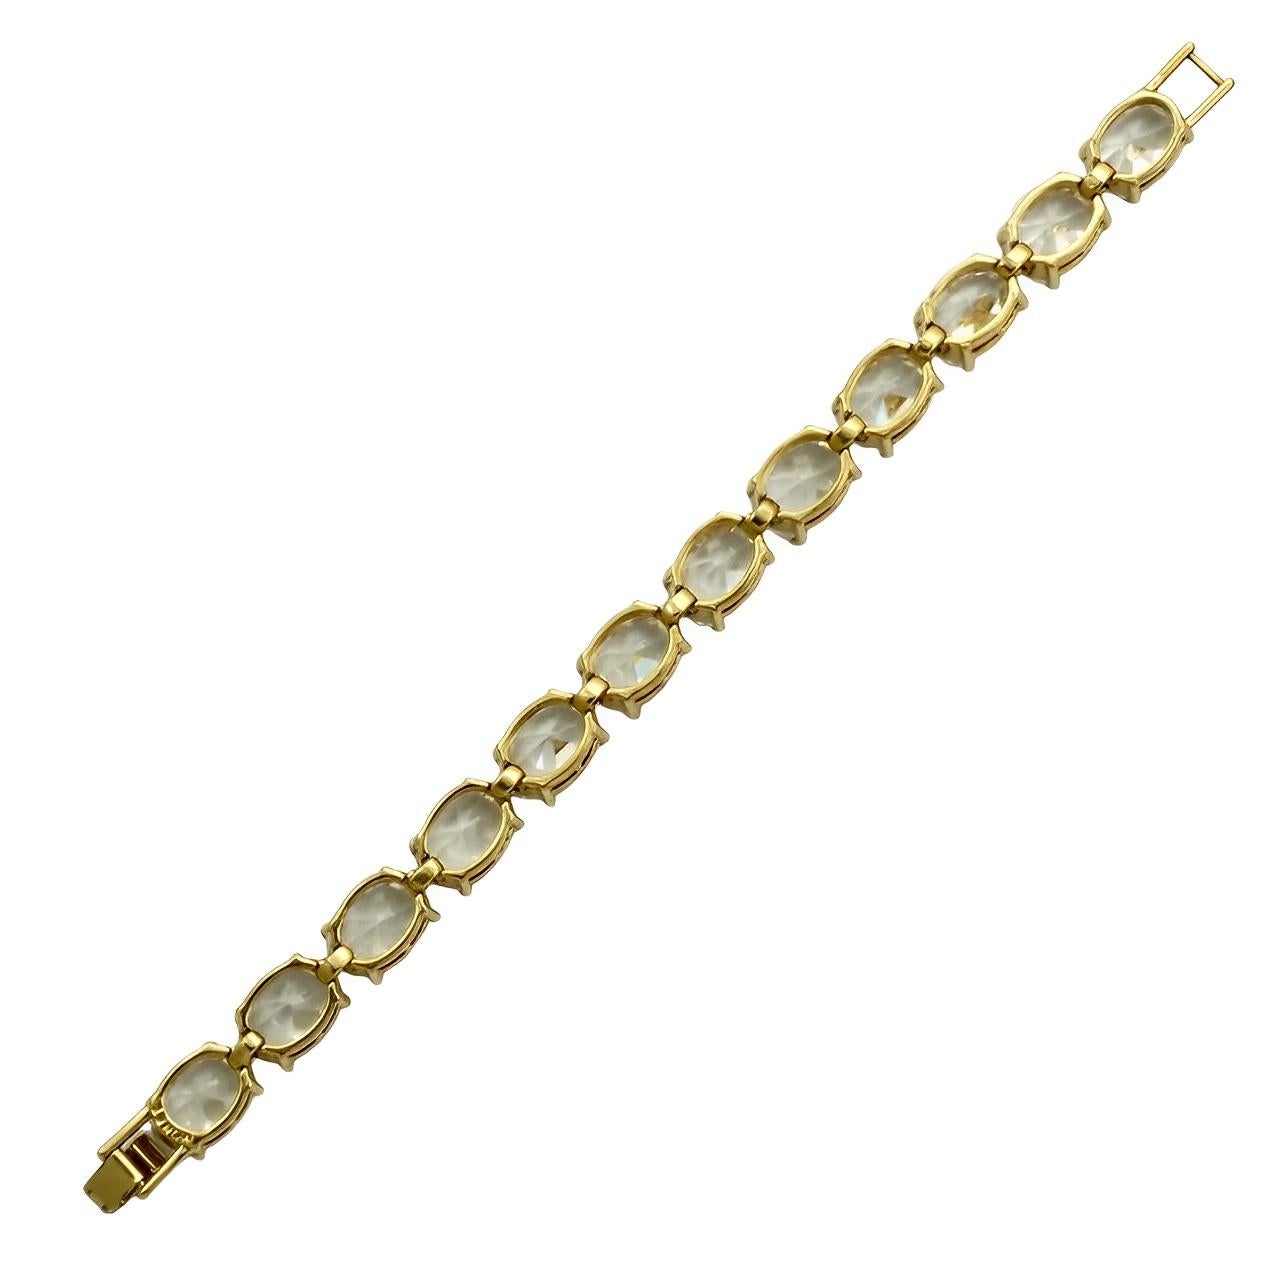 Monet Gold Plated and Large Clear Oval Rhinestone Link Bracelet In Good Condition For Sale In London, GB